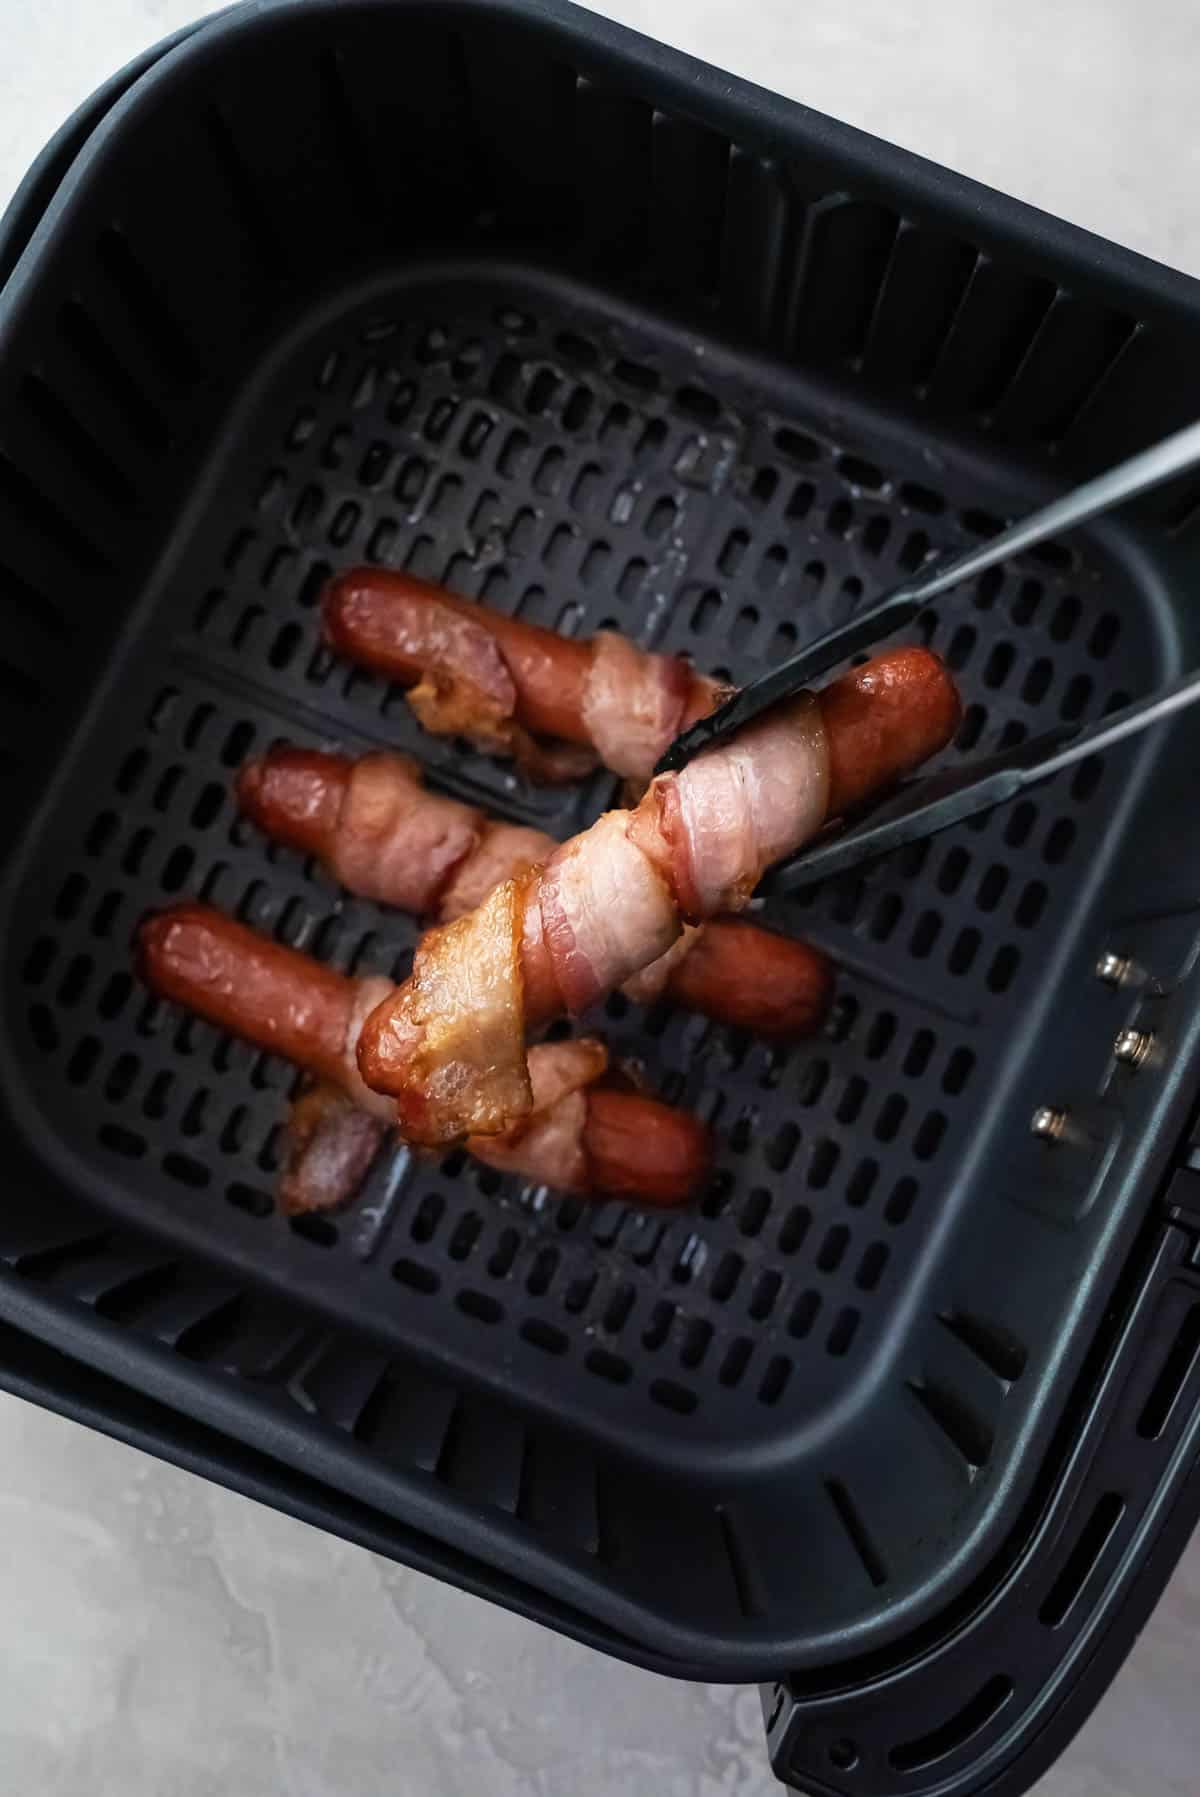 Tongs lifting a bacon wrapped hot dog out of an air fryer basket.